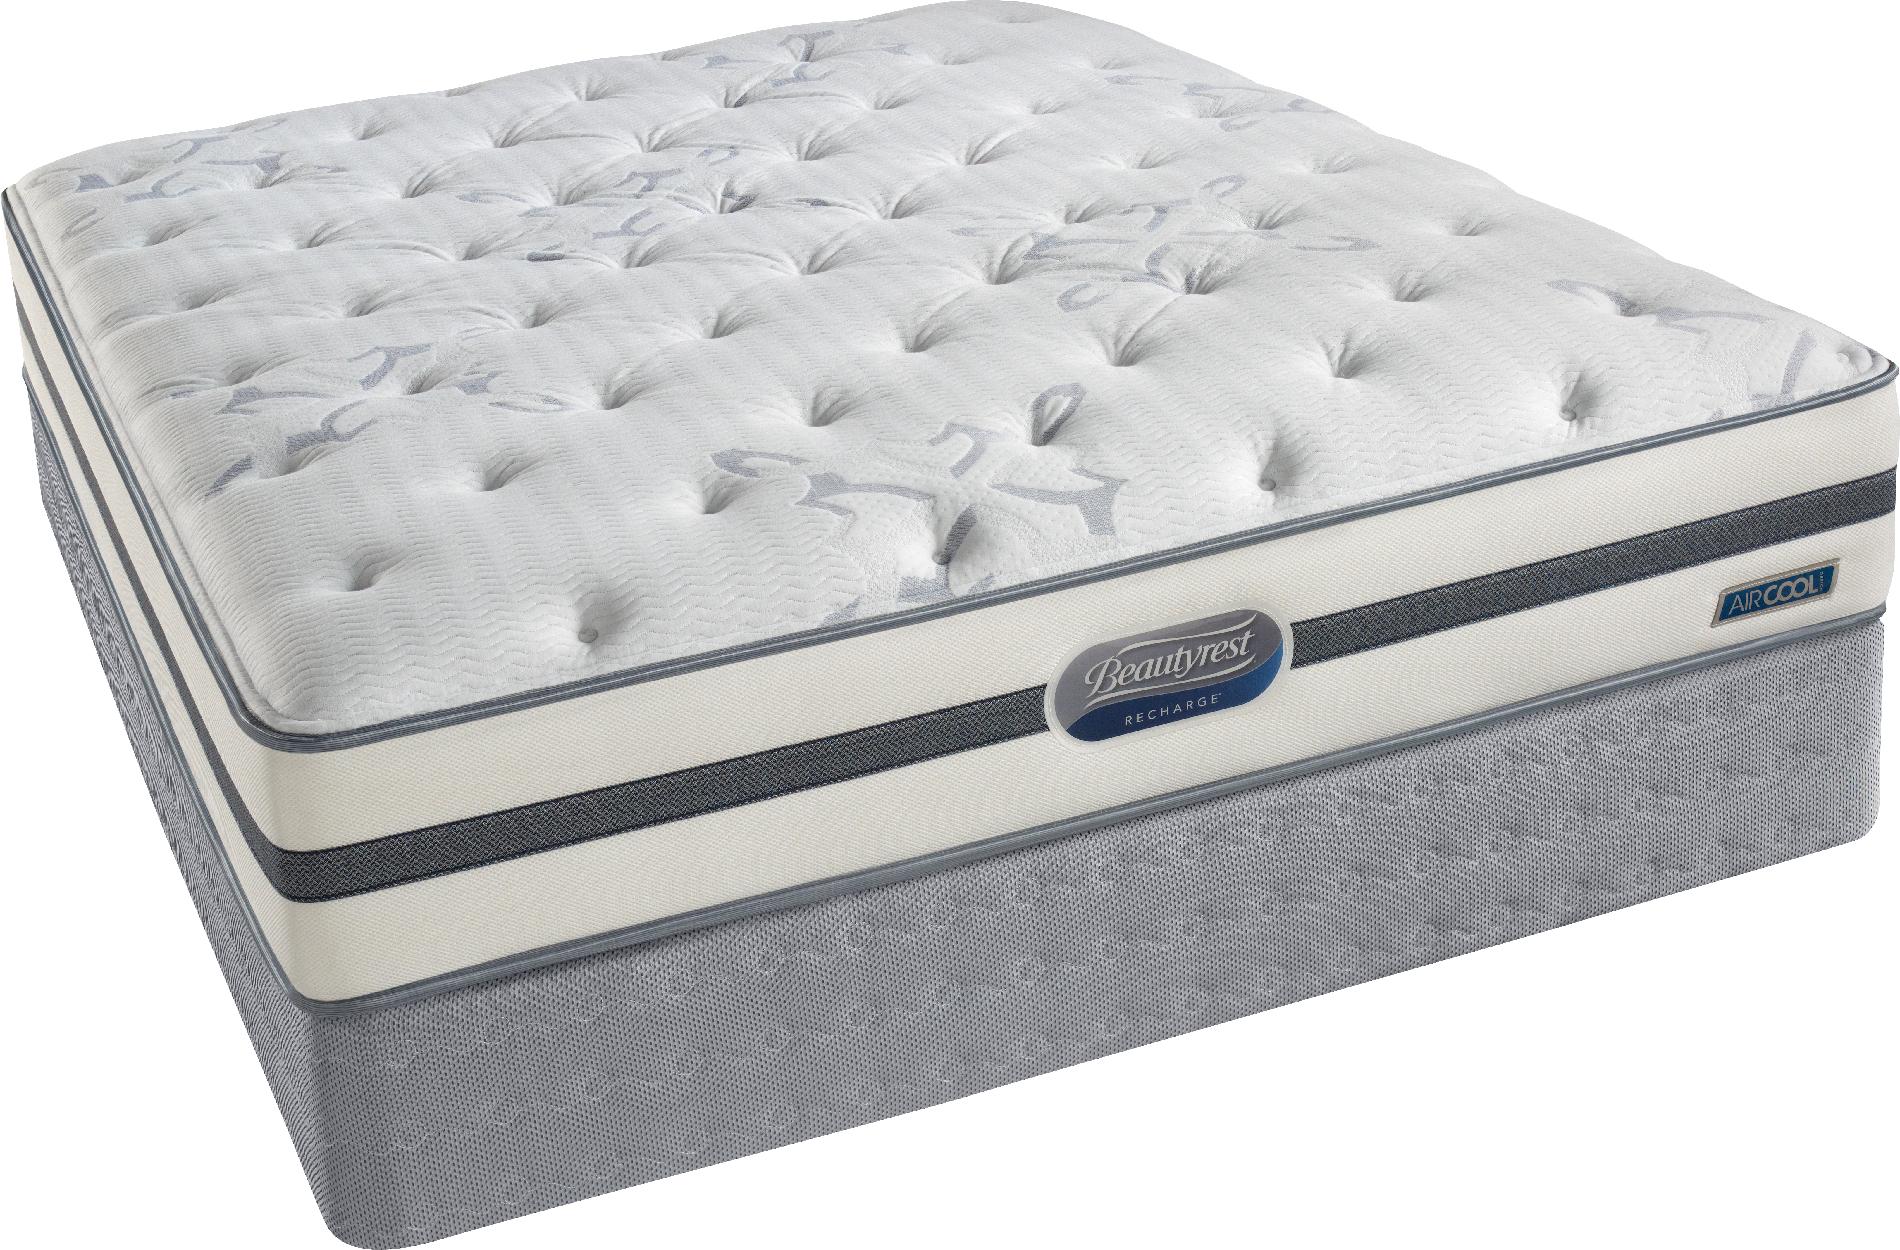 sears outlet usedpillow top mattress king size